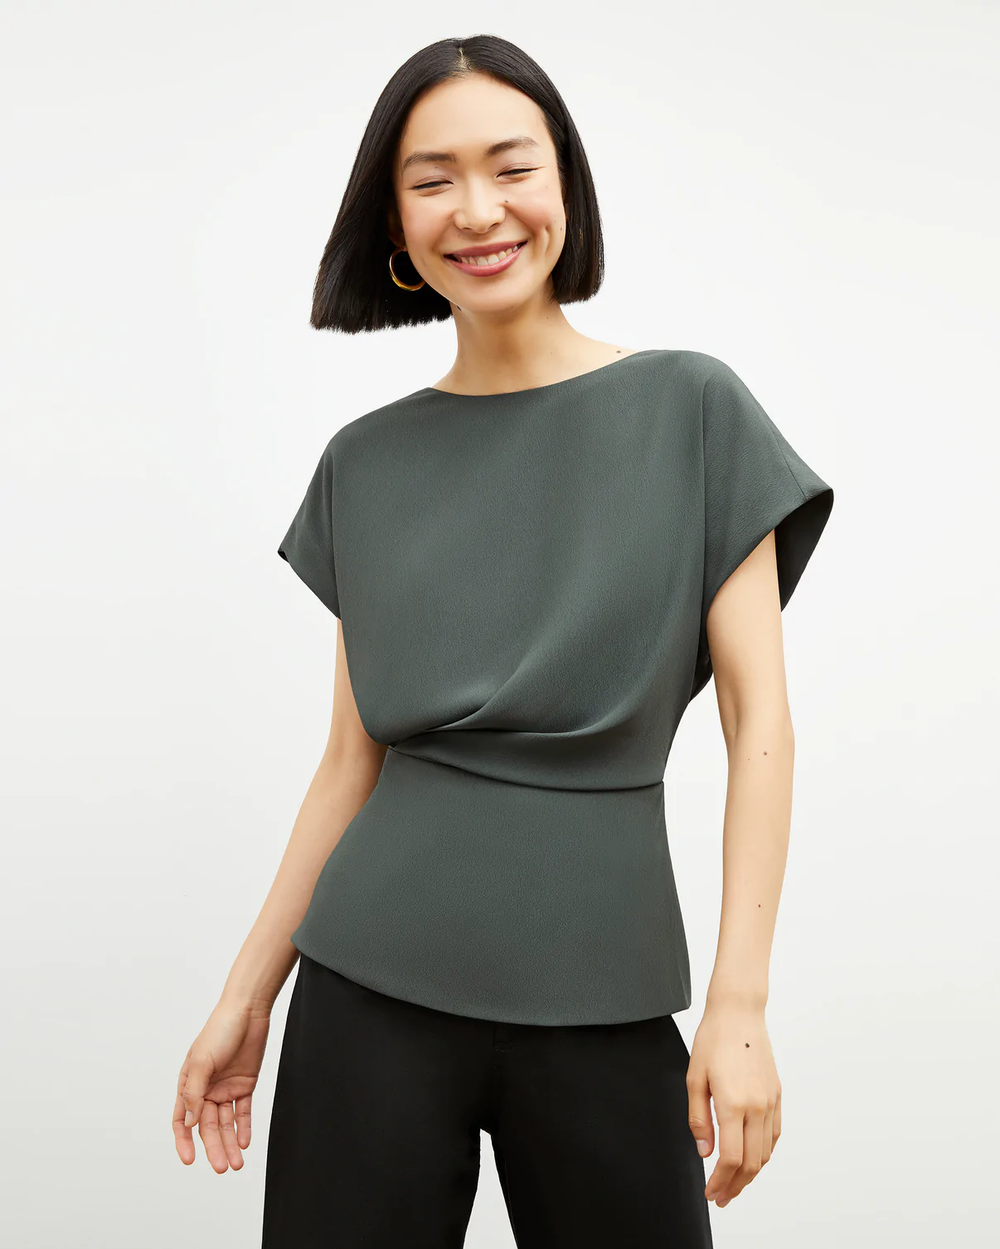 9 Best Tops For Small Busts (2023) – topsfordays